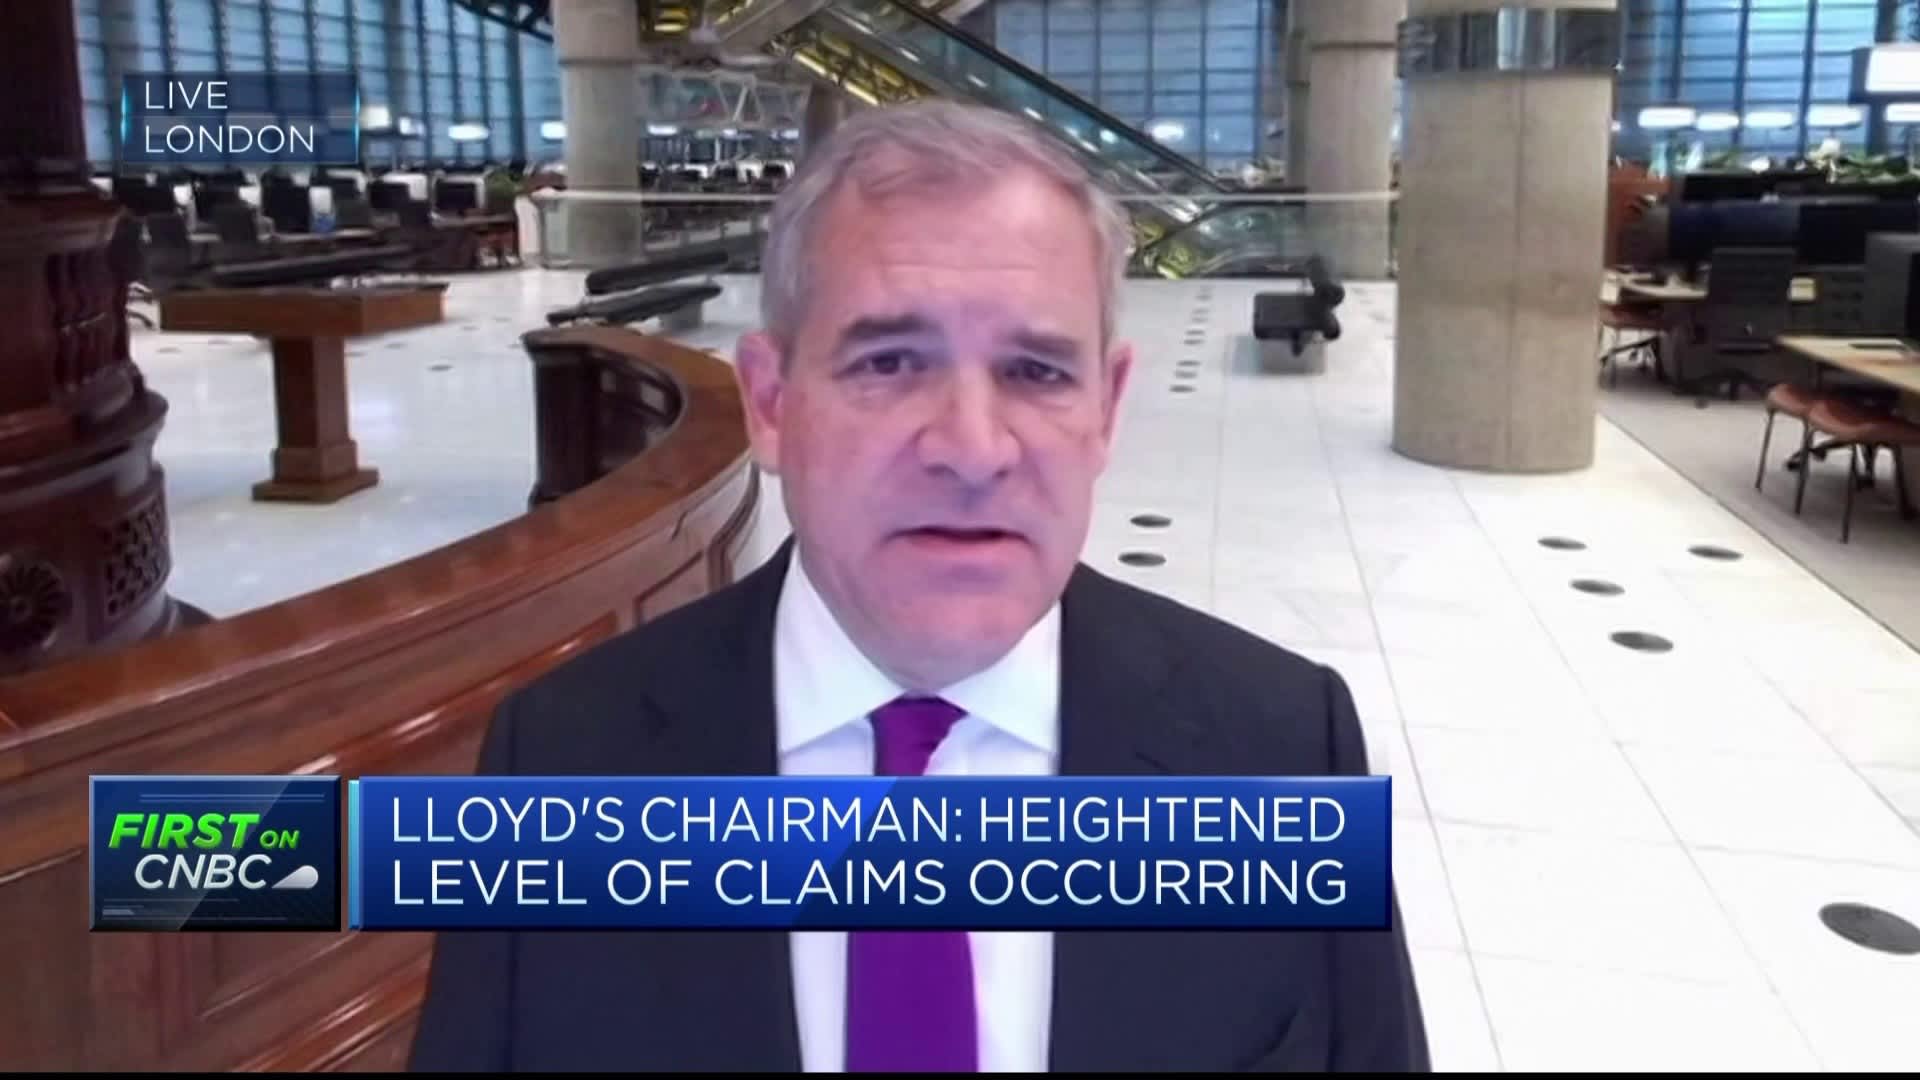 Baltimore bridge collapse may generate largest ever marine-insured loss: Lloyd's of London chair